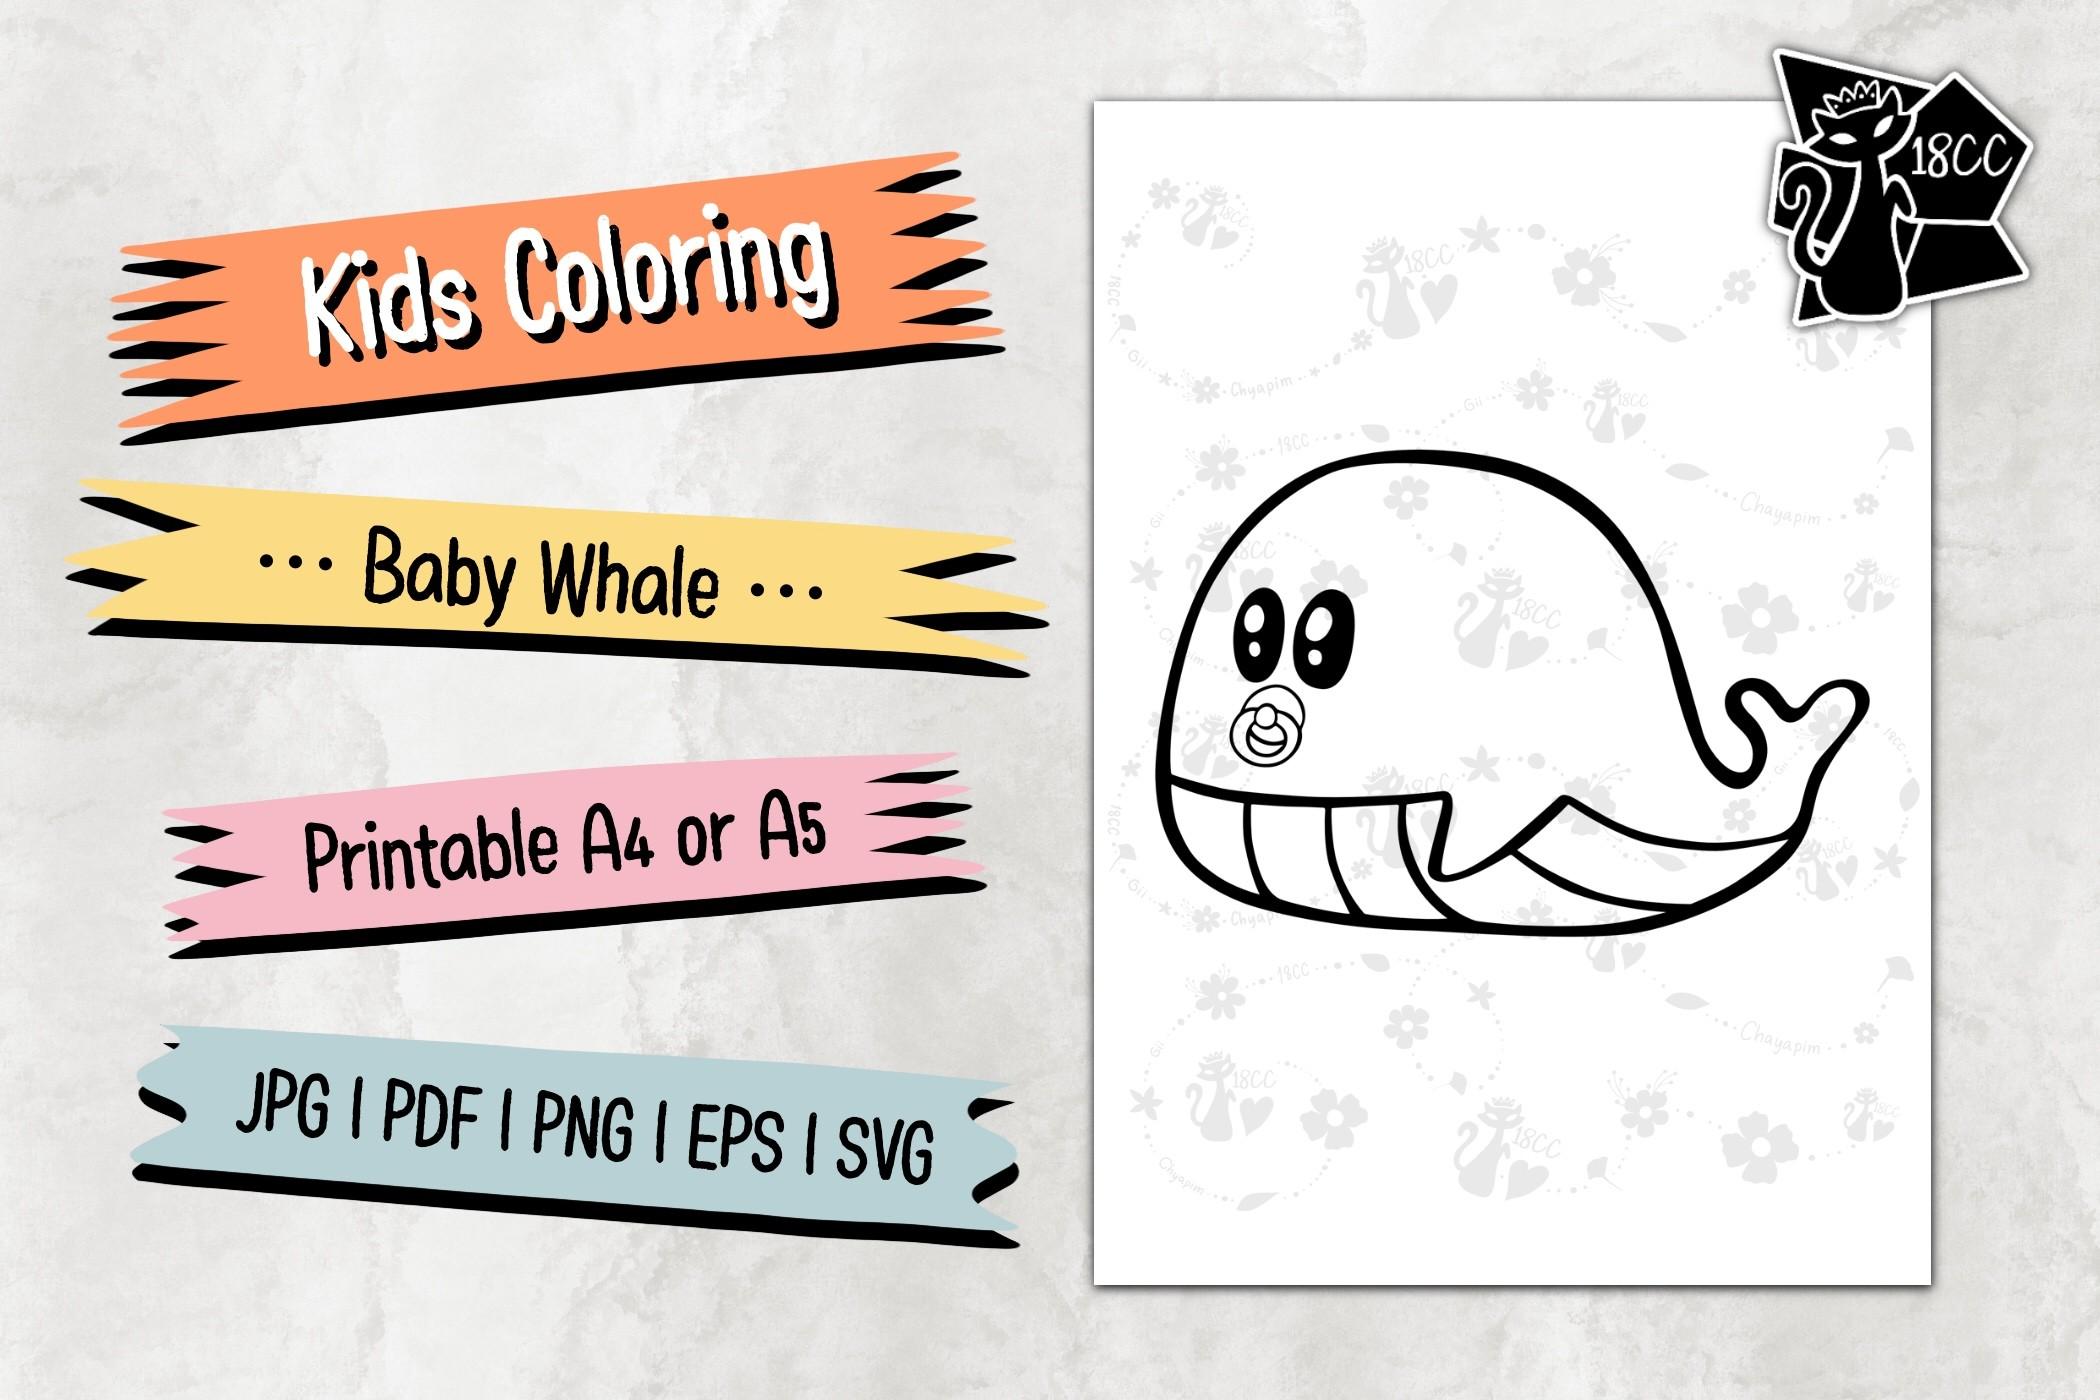 ‪Baby Whale JPG PDF PNG EPS SVG‬